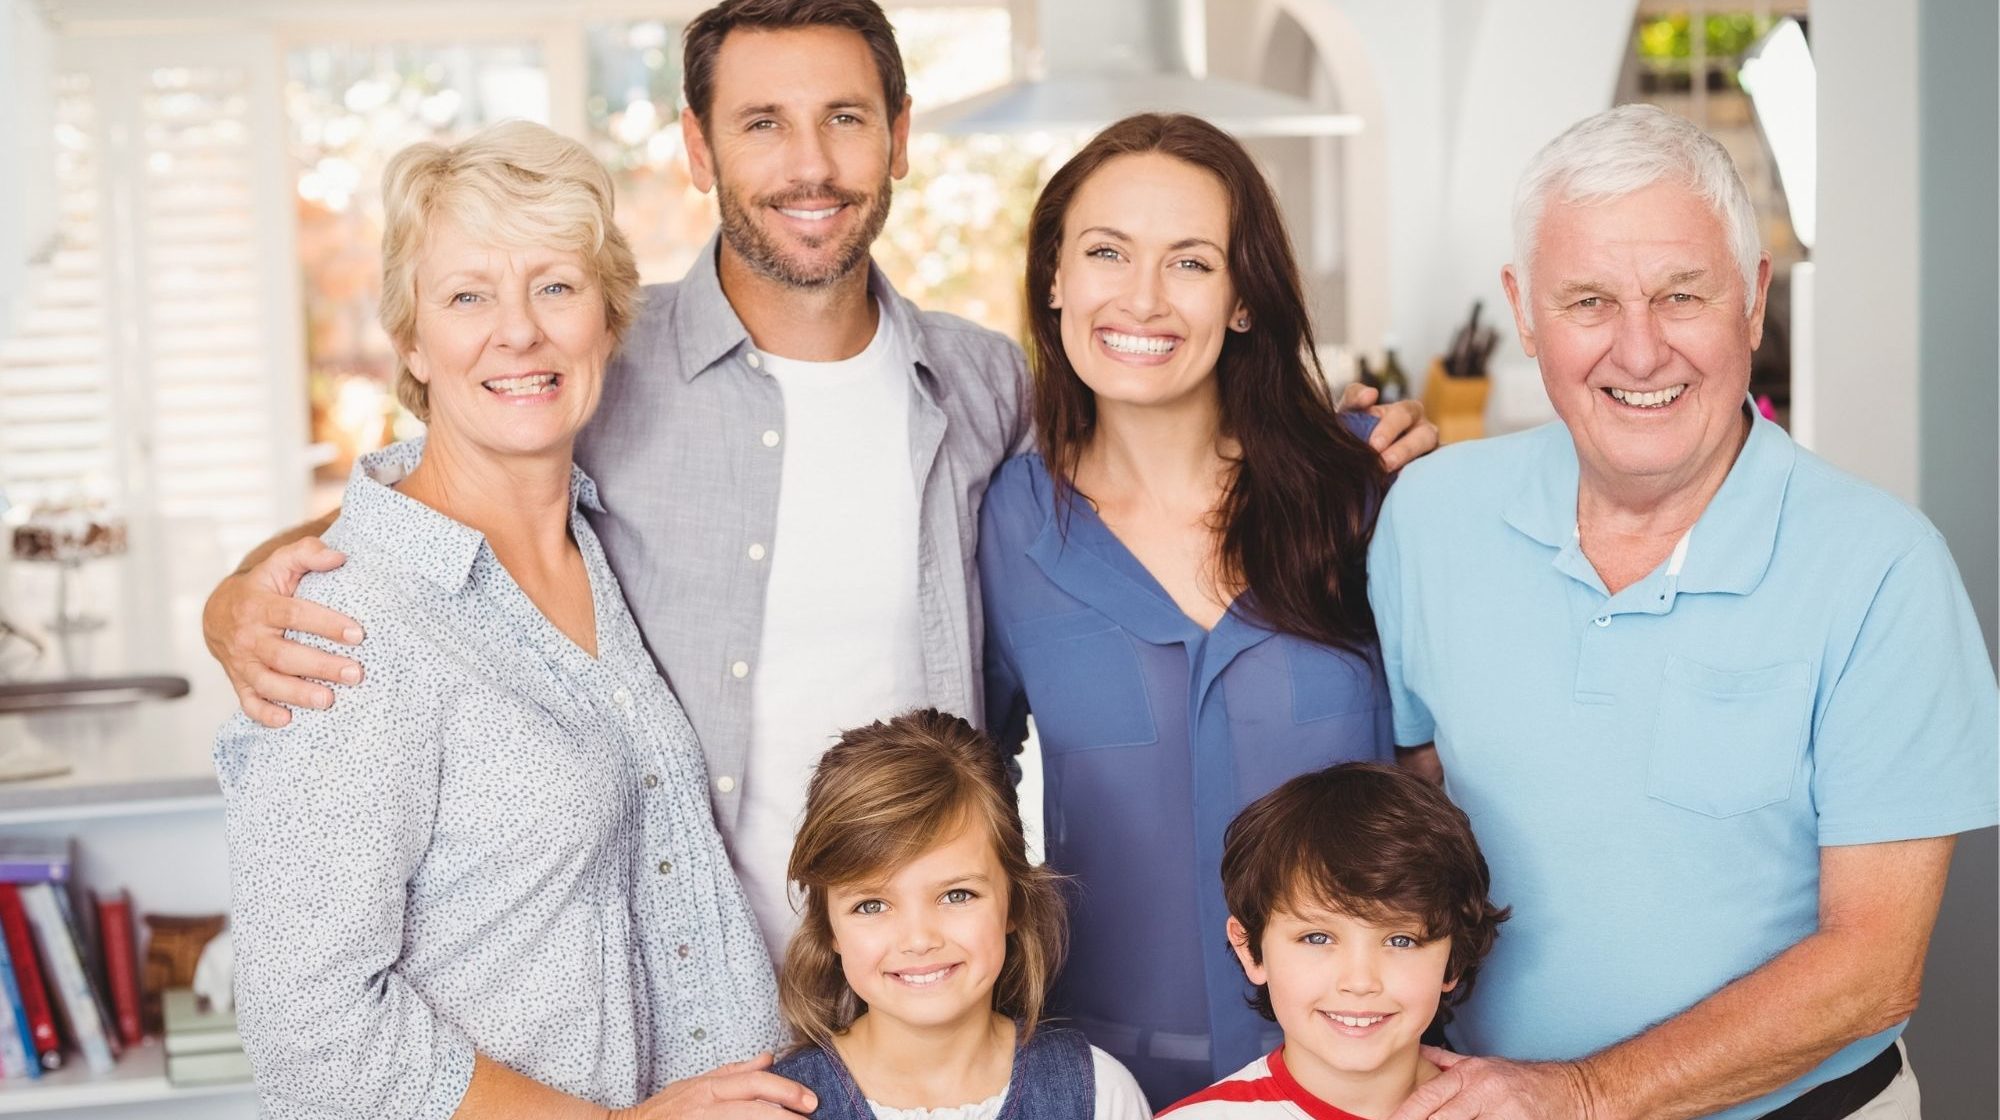 Planning to Change to a Multigenerational Home?